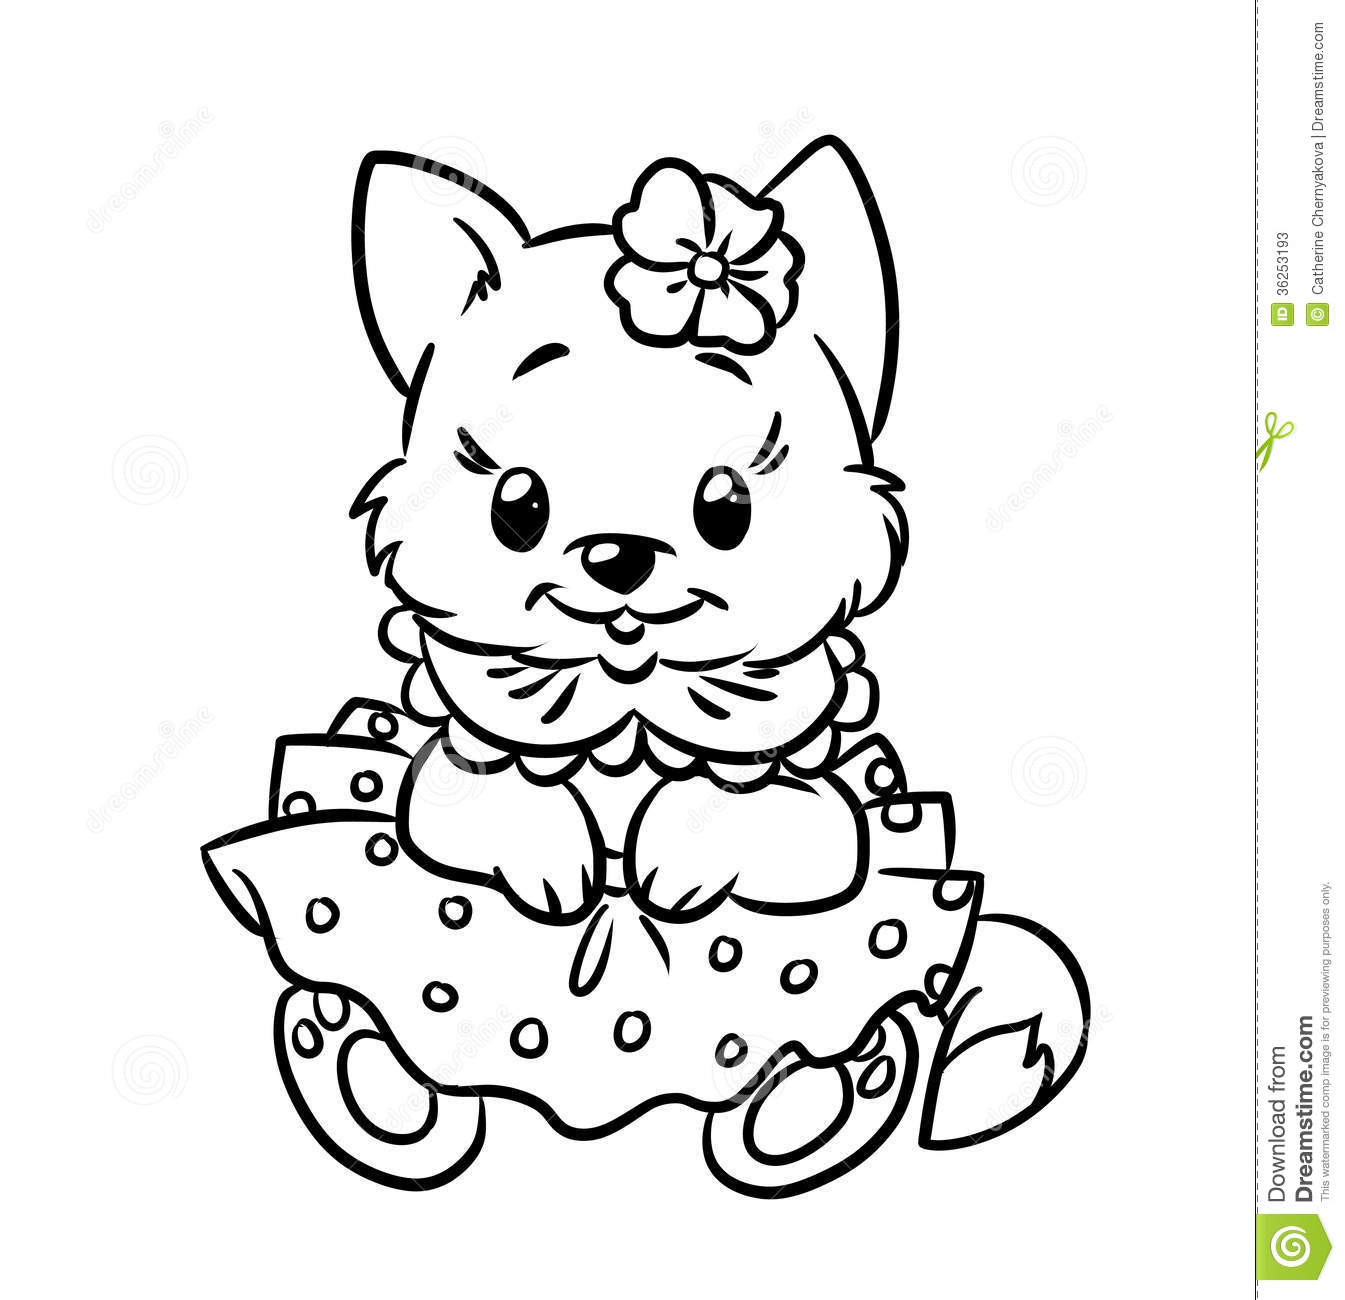 Litten Coloring Pages
 Too Cute Kittens Coloring Pages Kitten ly grig3